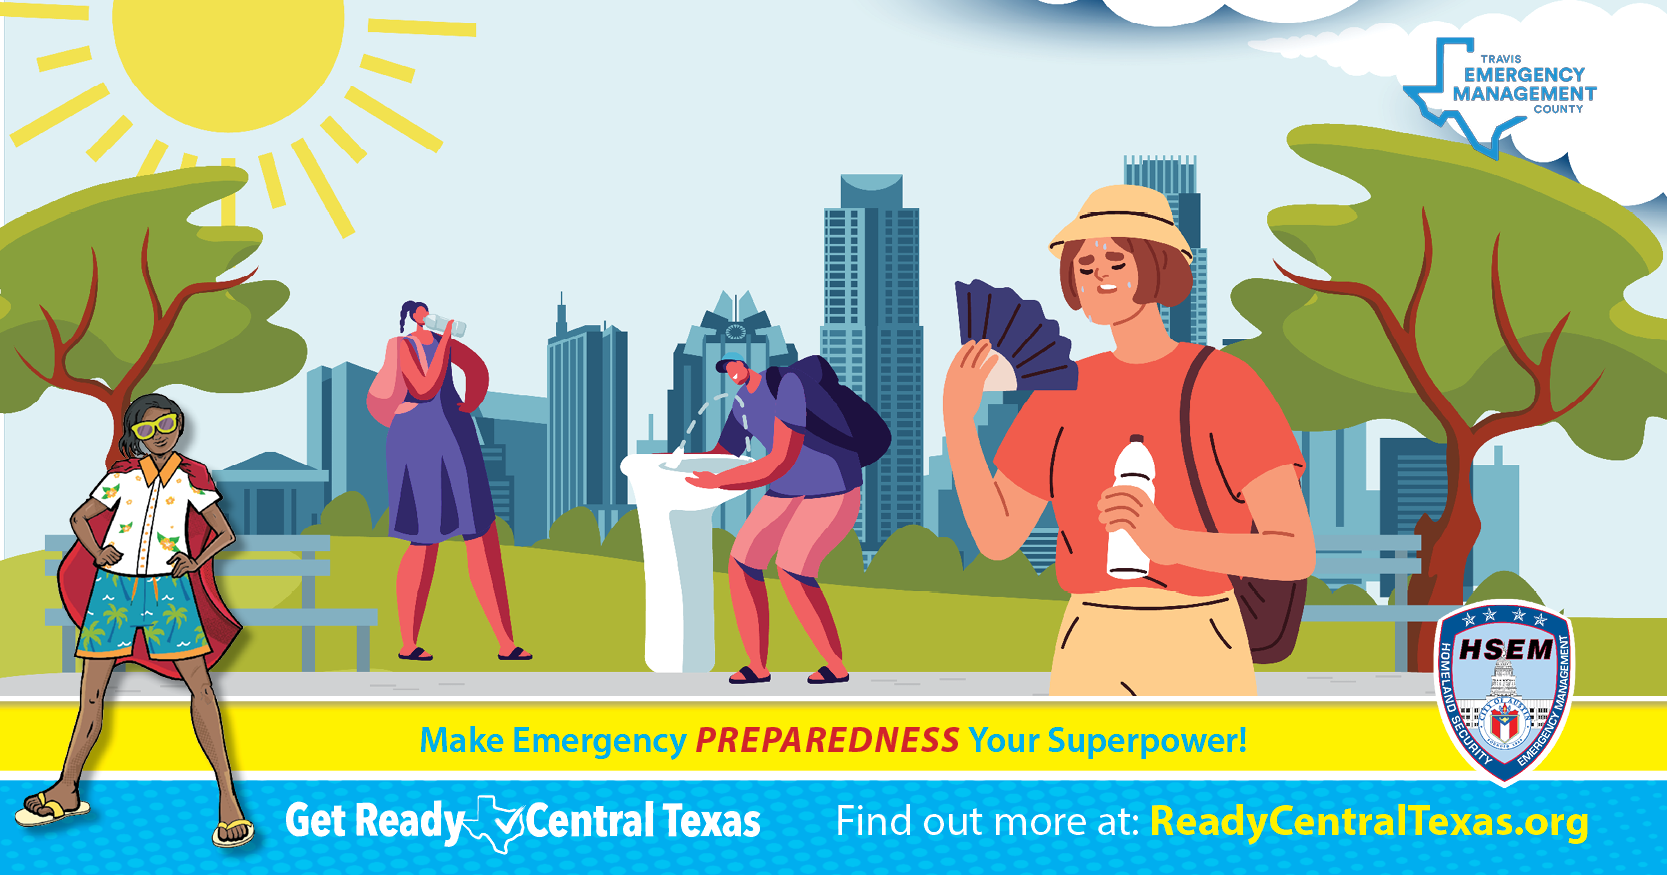 Cartoon style image. People walking in park on sunny hot day. Some are drinking water, others fanning themselves. Austin skyline in background. Text on image: Make emergency preparedness your superpower! Female superhero in summer attire in foreground.